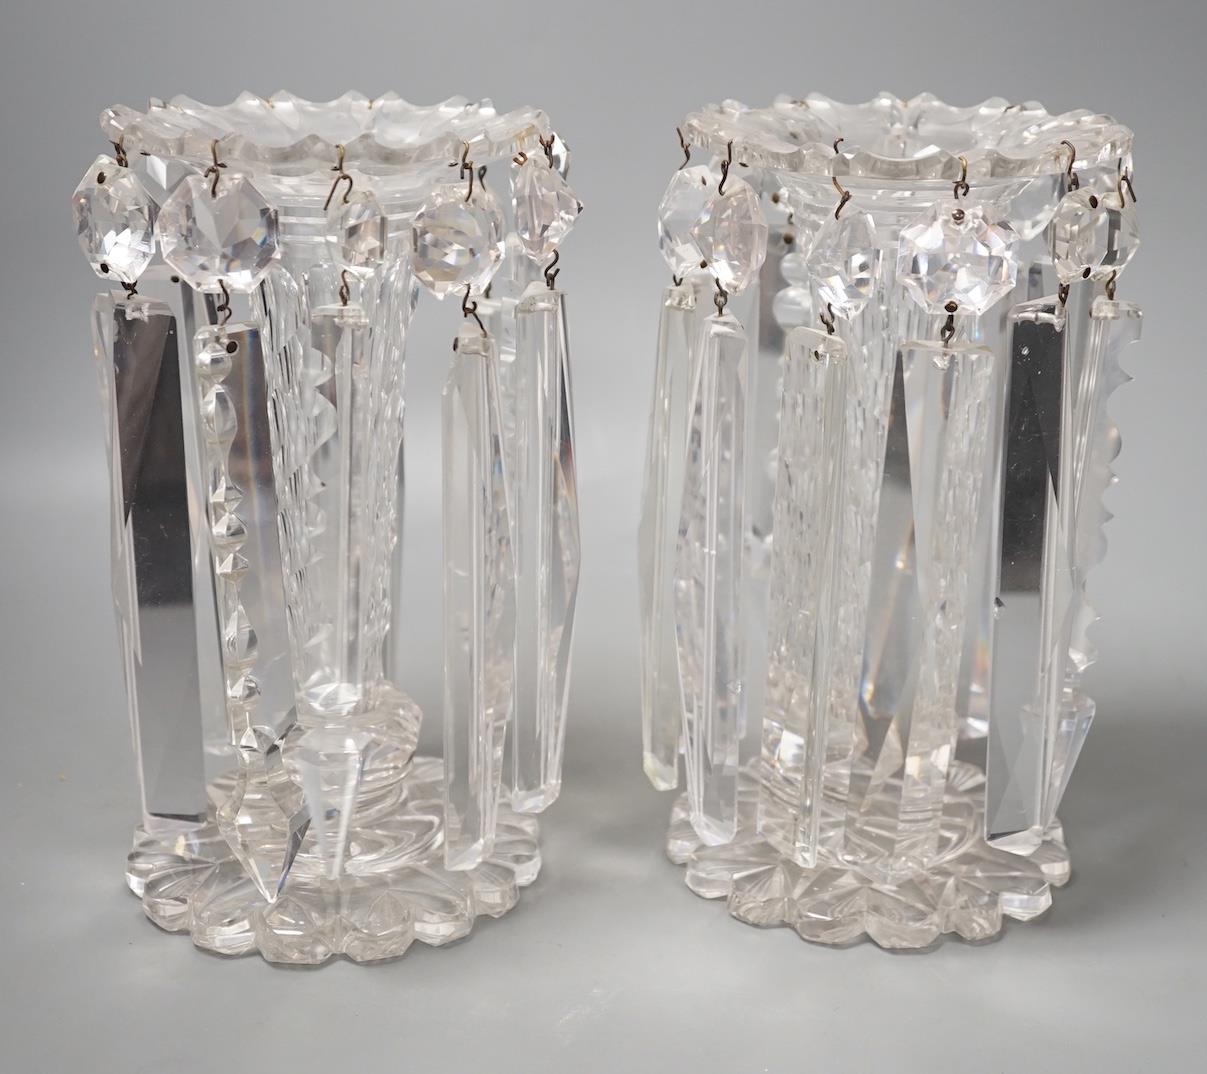 A Pair of Victorian clear glass table lustres - 23cm high